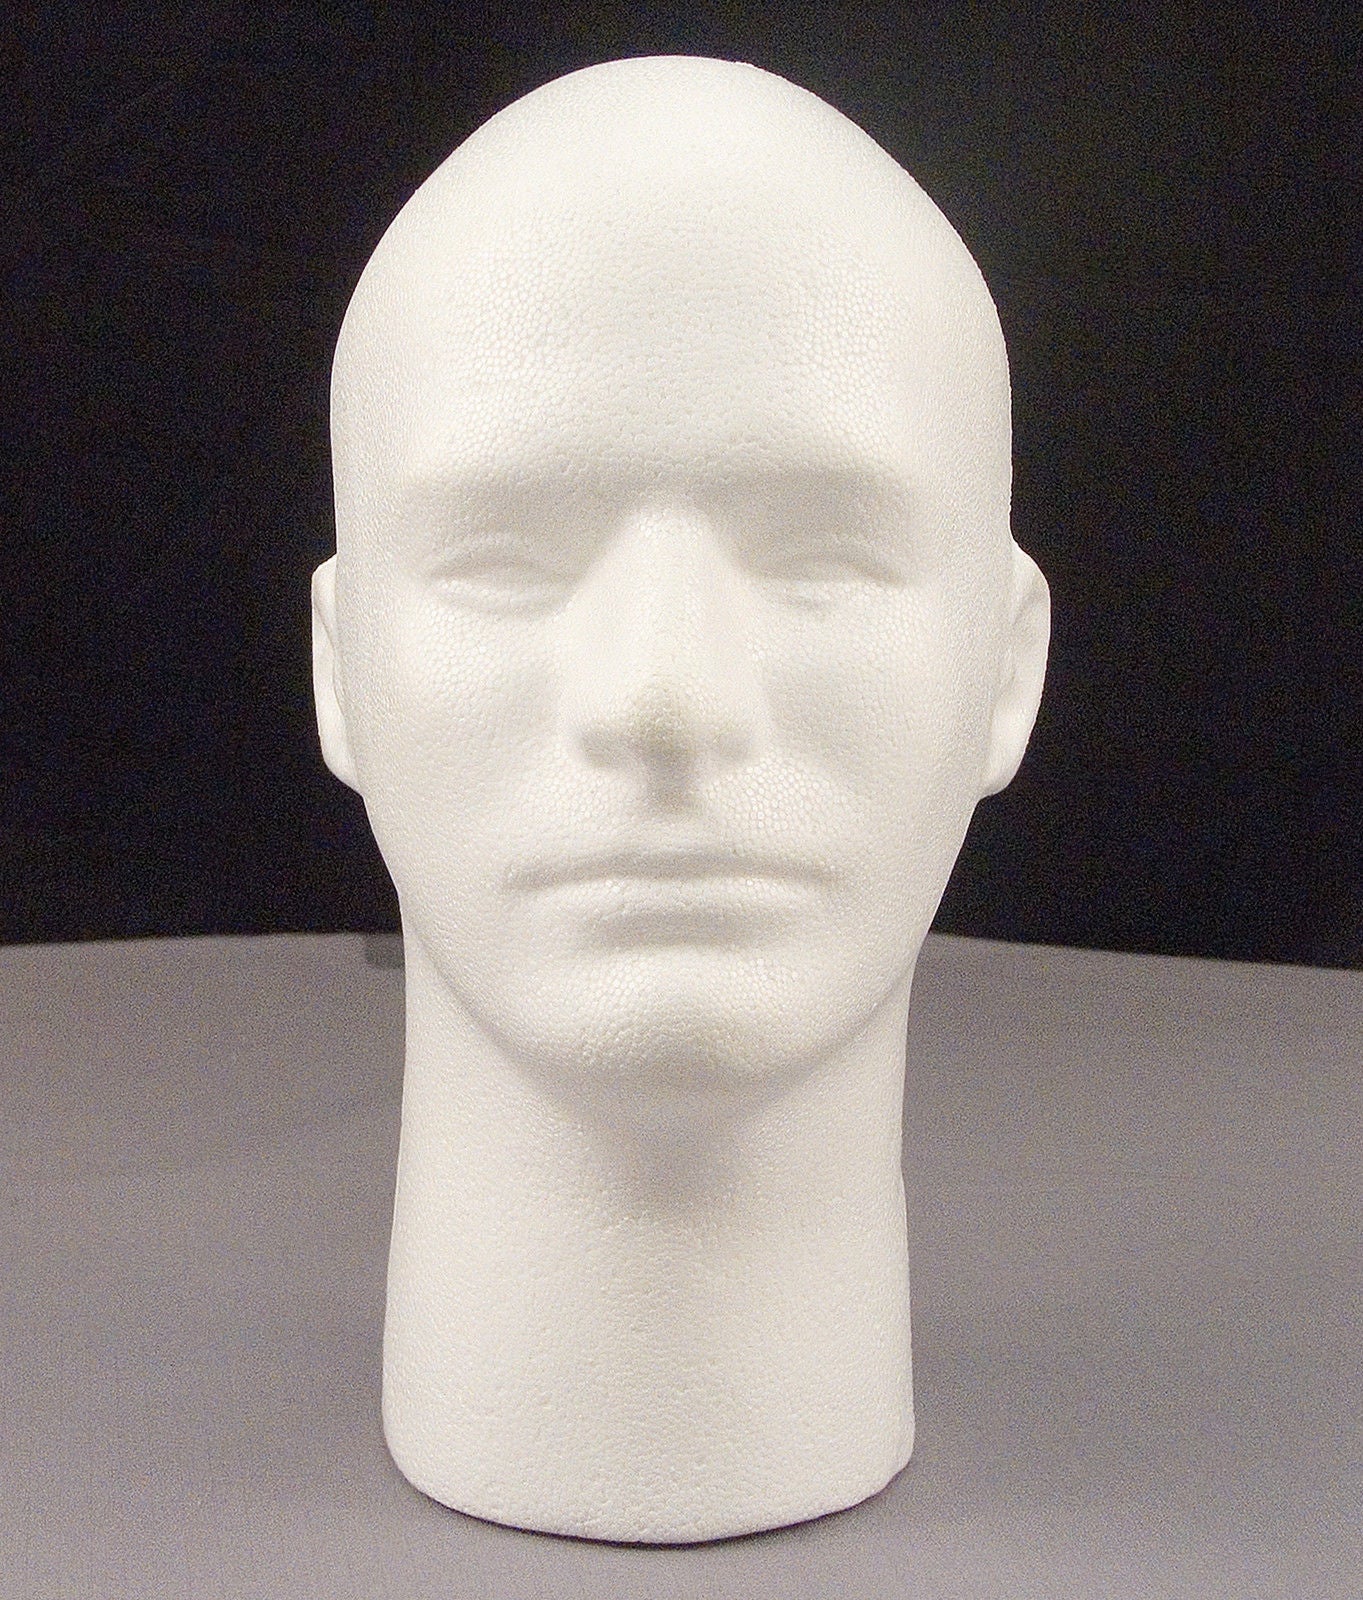 Male Mannequin Styrofoam 12" Head Bust With Face - Display Wigs, Glasses, & Hats